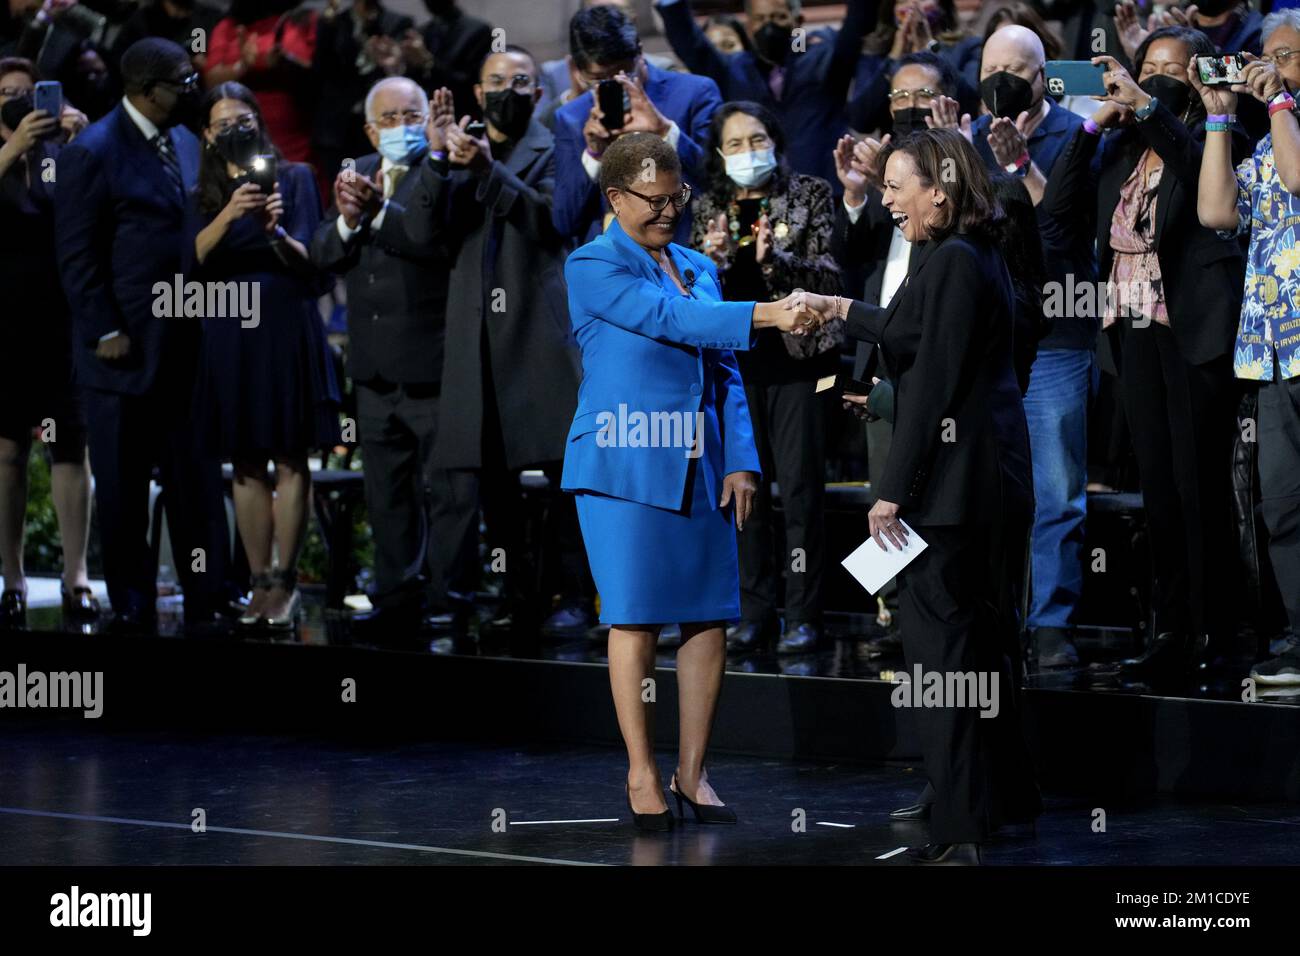 Los Angeles, United States. 11th Dec, 2022. Karen Bass, mayor of Los Angeles, California, shakes hands with Vice President Kamala Harris during an inaugural ceremony in Los Angeles, California on Sunday, December 11, 2022. A six-term congresswomen, Bass last month was elected as the first female and second Black mayor of Los Angeles running on a platform that emphasized her beginnings as a community organizer and experience as a veteran legislator in Sacramento and Washington. Photo by Eric Thayer/UPI Credit: UPI/Alamy Live News Stock Photo